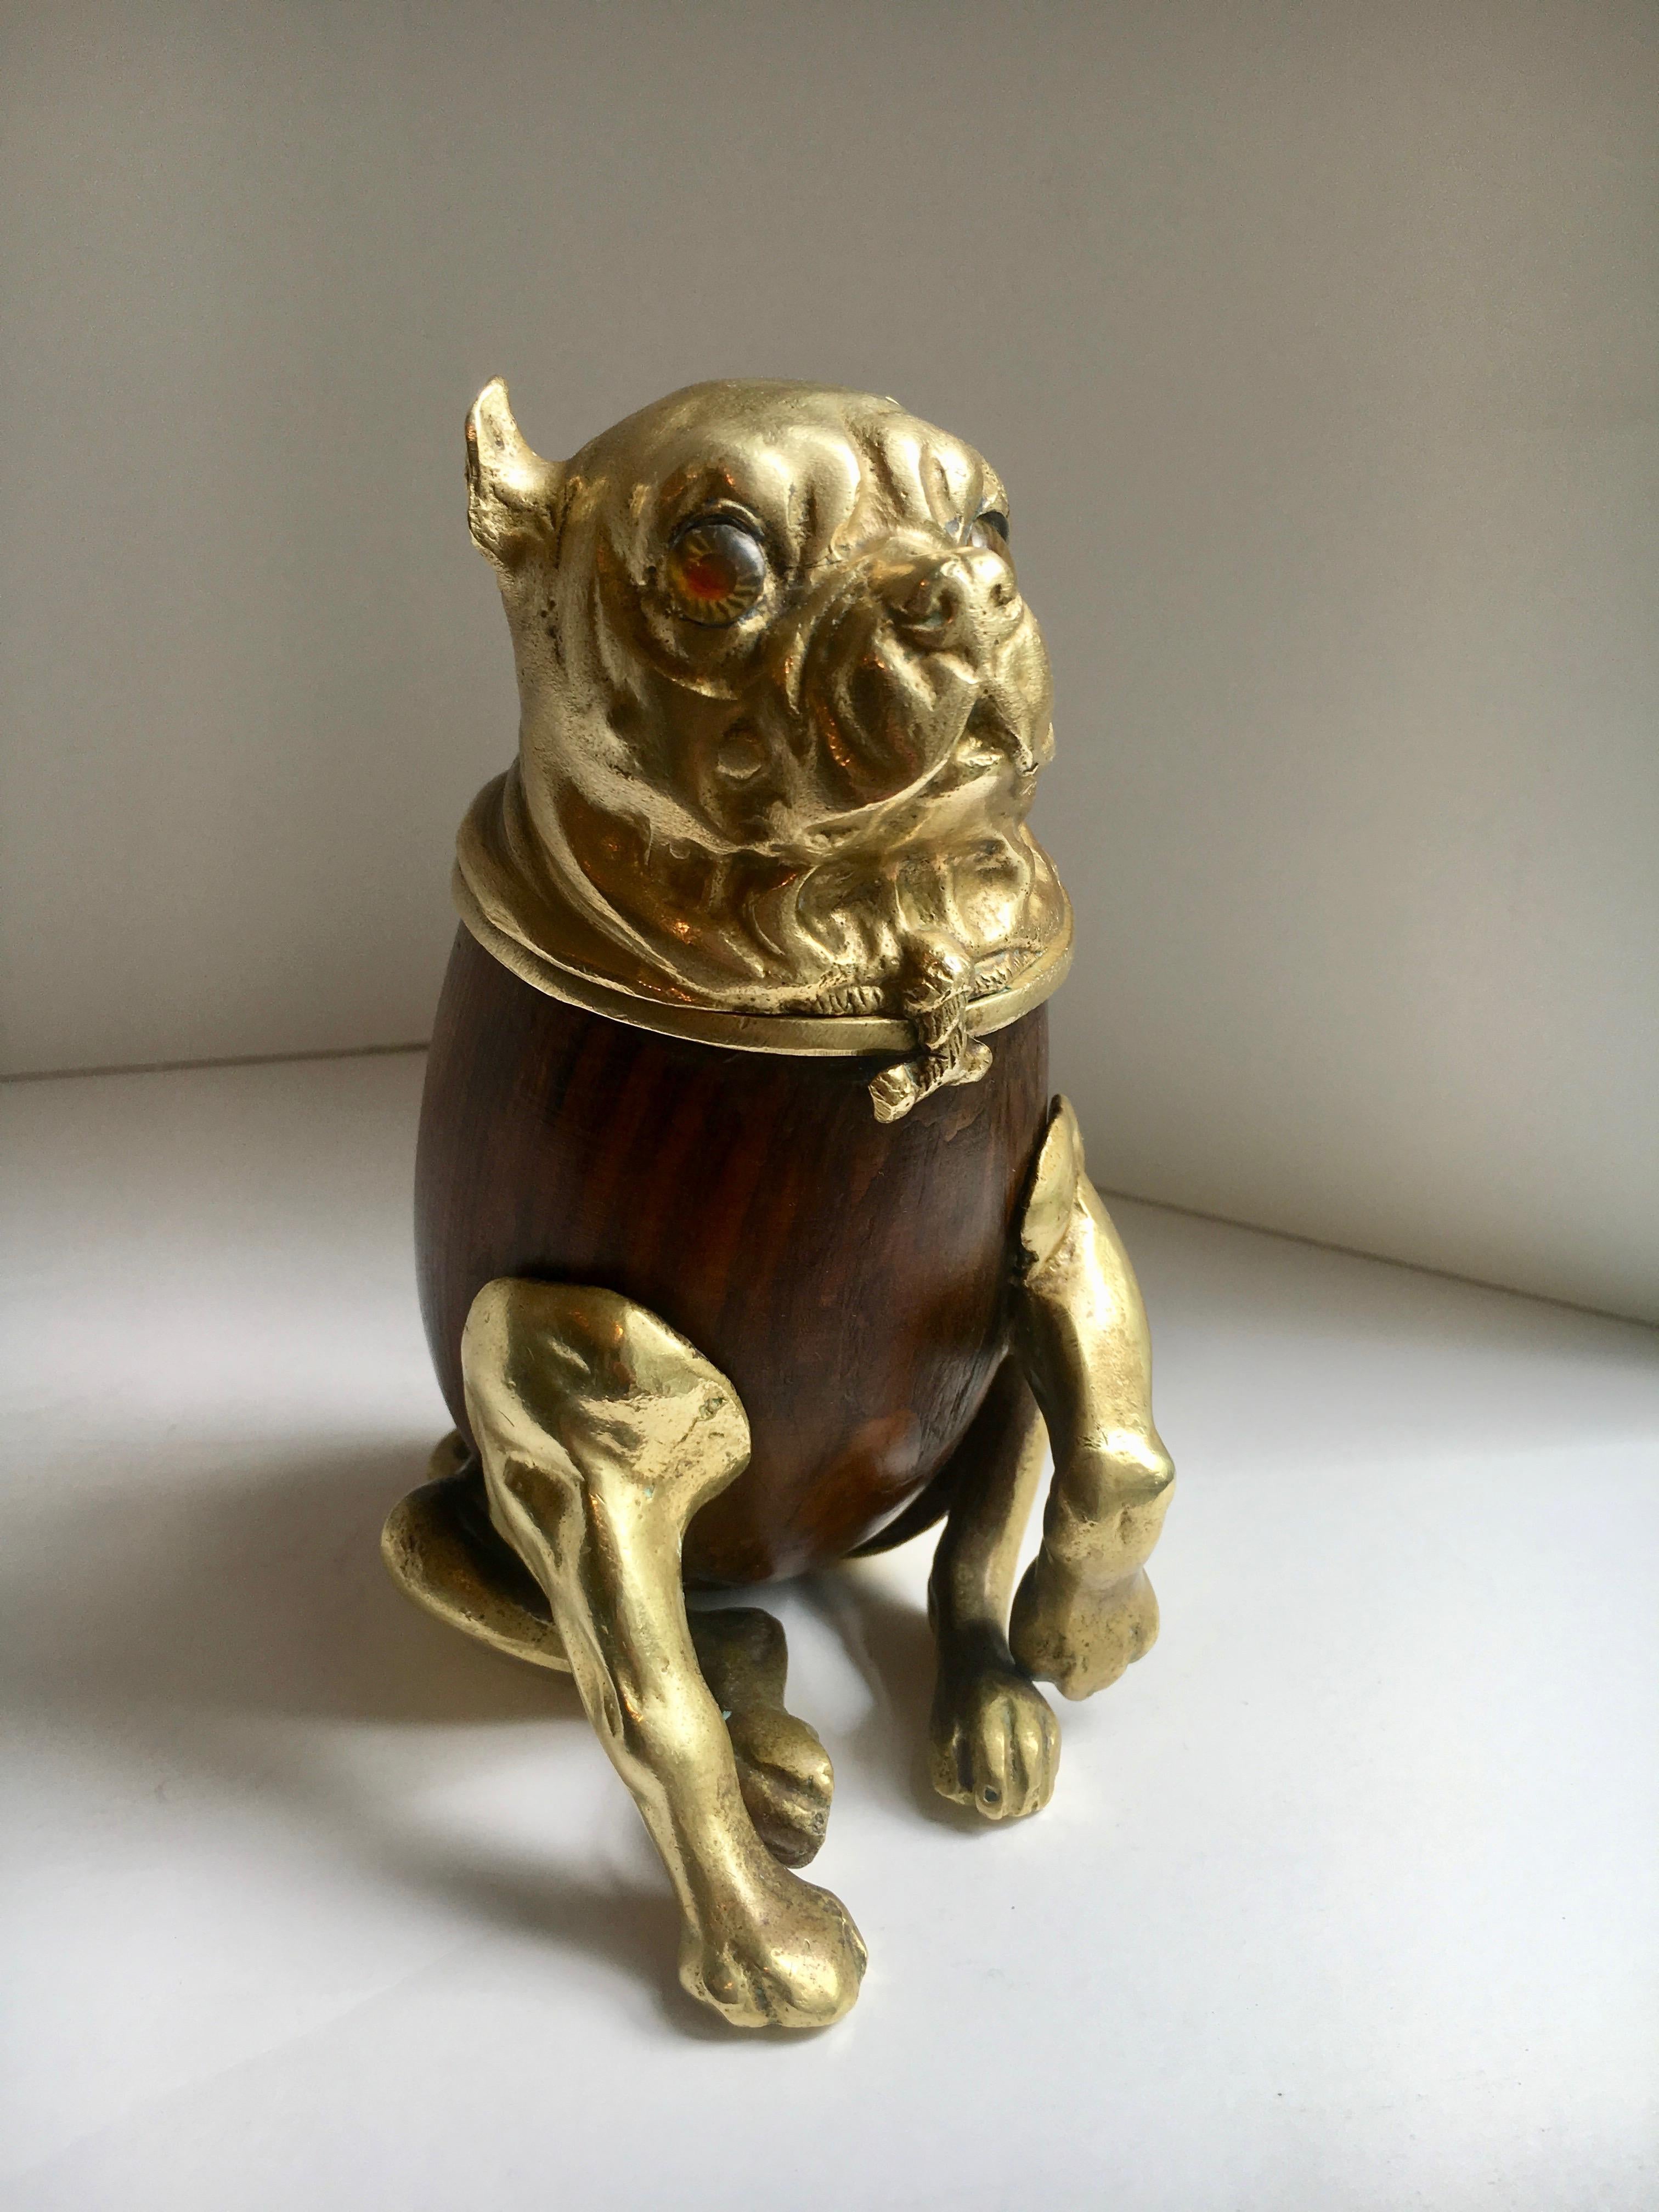 Arthur Court French bulldog box - Wooden and brass box with a head for all things private or fancy, from 420 to jewels and love notes.. or perhaps a dog biscuit or two.

A handsome addition to the desk, holding paper clips or bon-boys. or in the